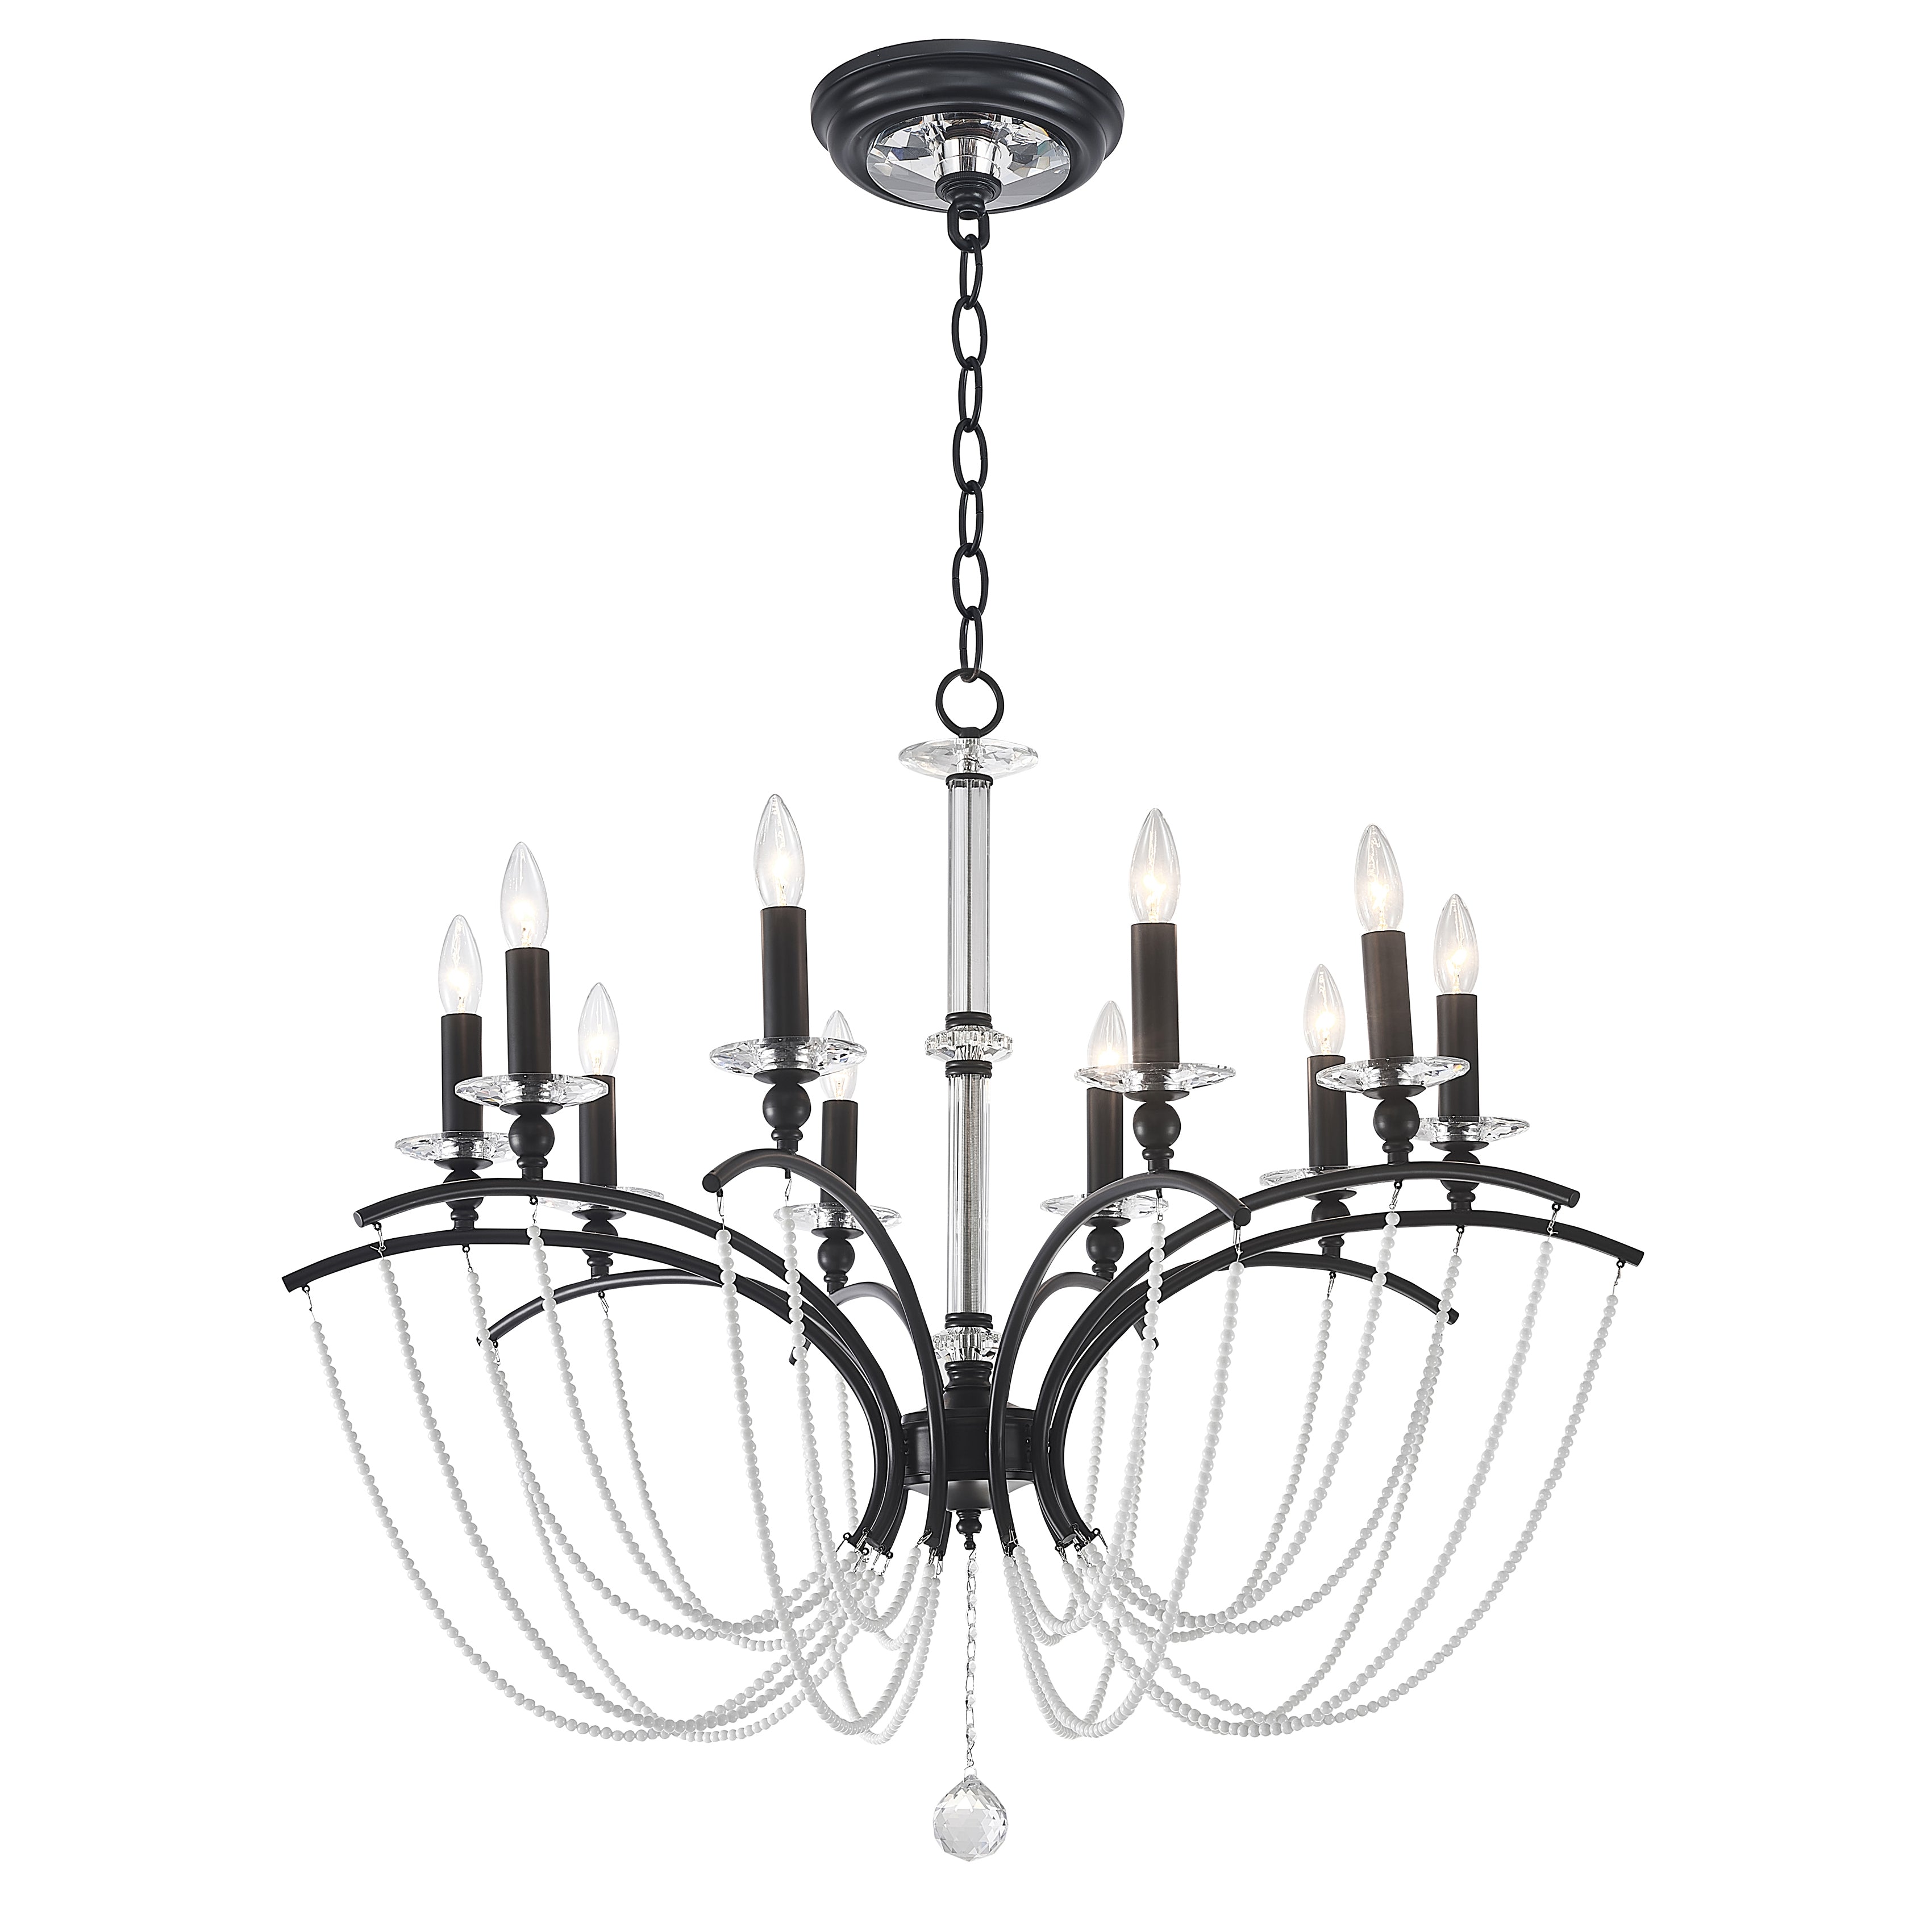 La Pearl Transitional Crystal Bead Chandelier BS91504A - Italian Concept - 